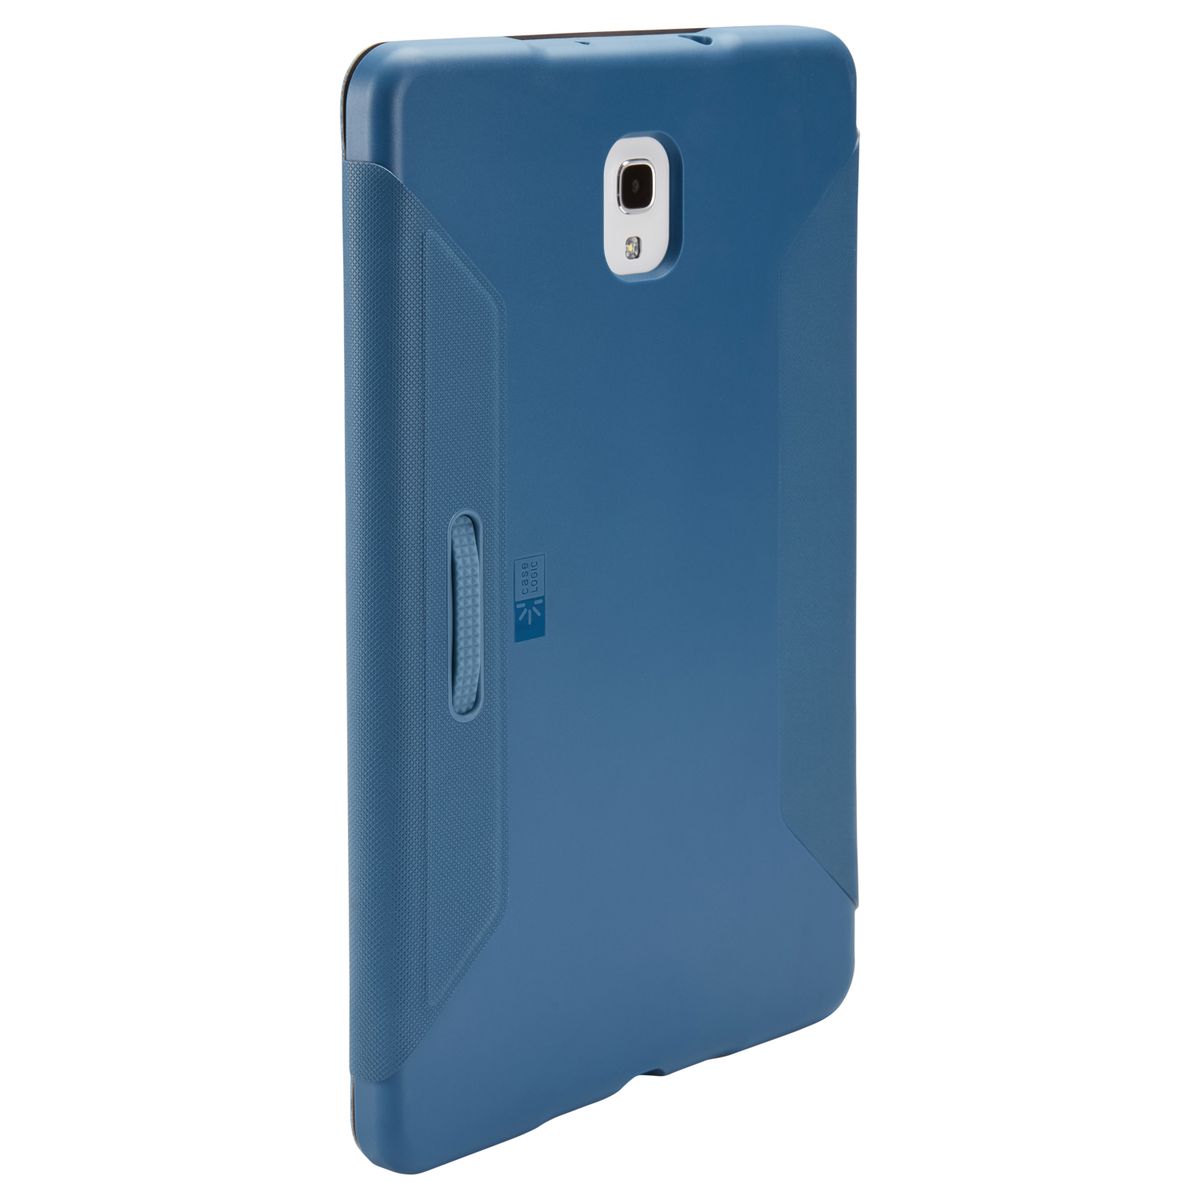 Case Logic SnapView Case for Samsung Galaxy Tab A 10.5"